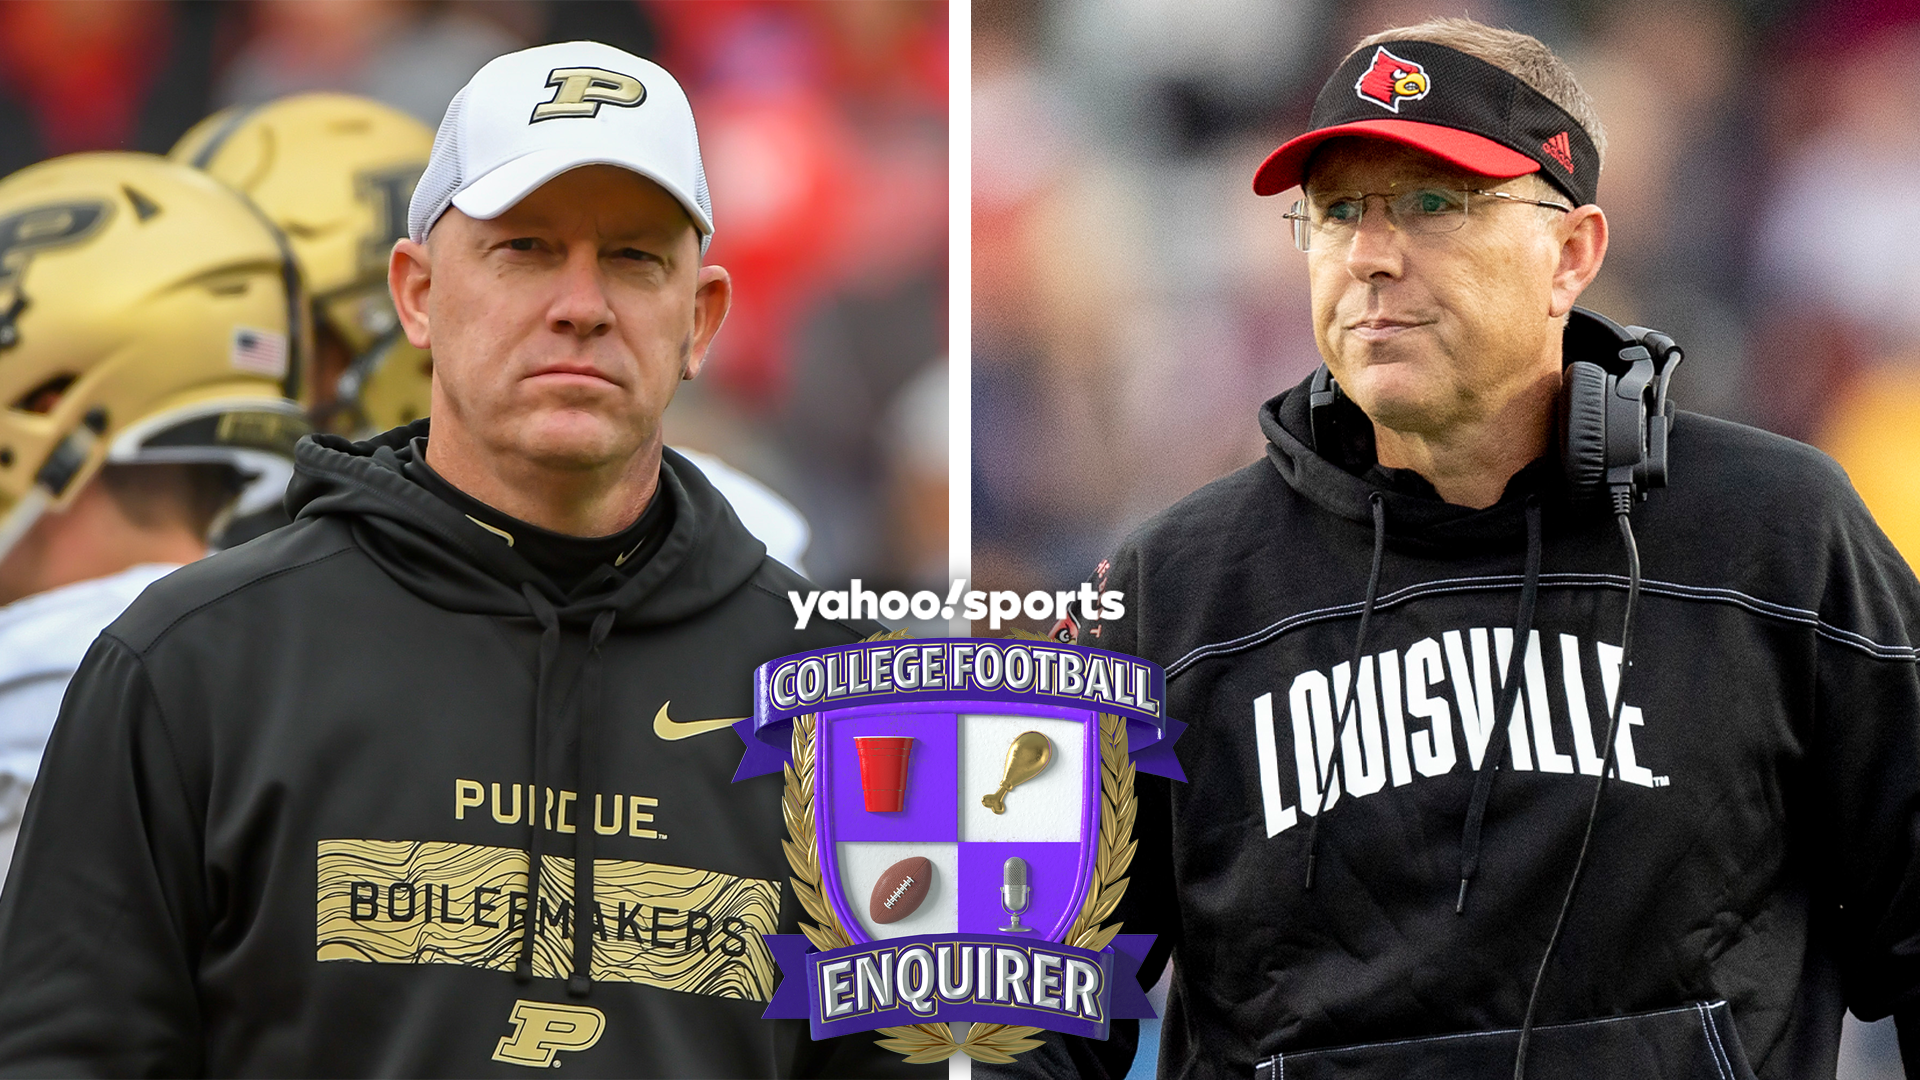 Louisville Brings Teams to Play in a Bubble